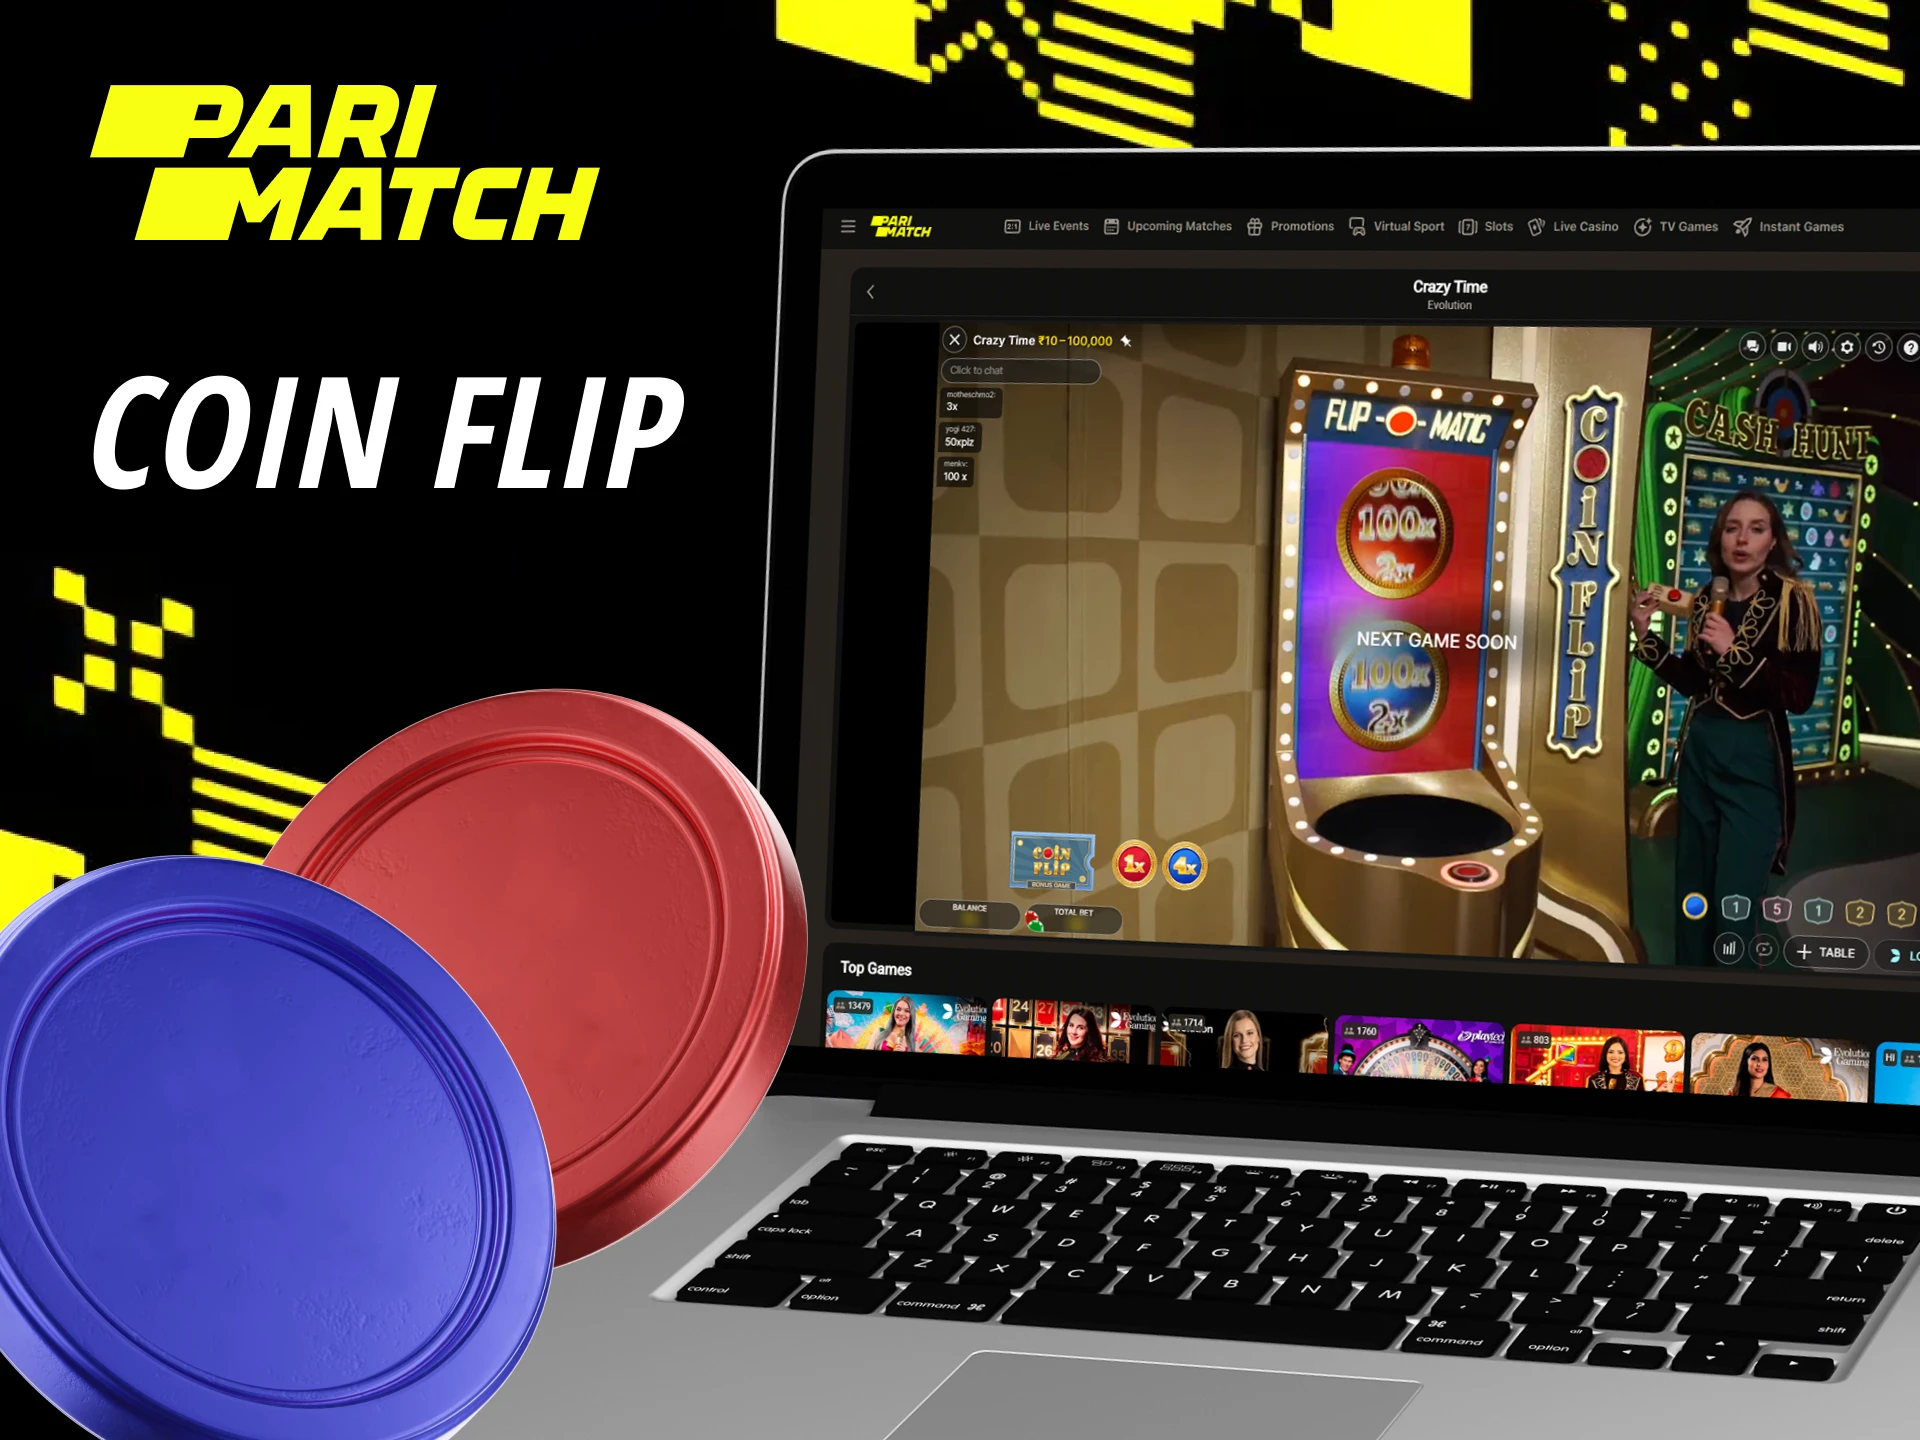 Parimatch Crazy Time Coin Flip is a bonus game where you can try your luck on a coin flip.